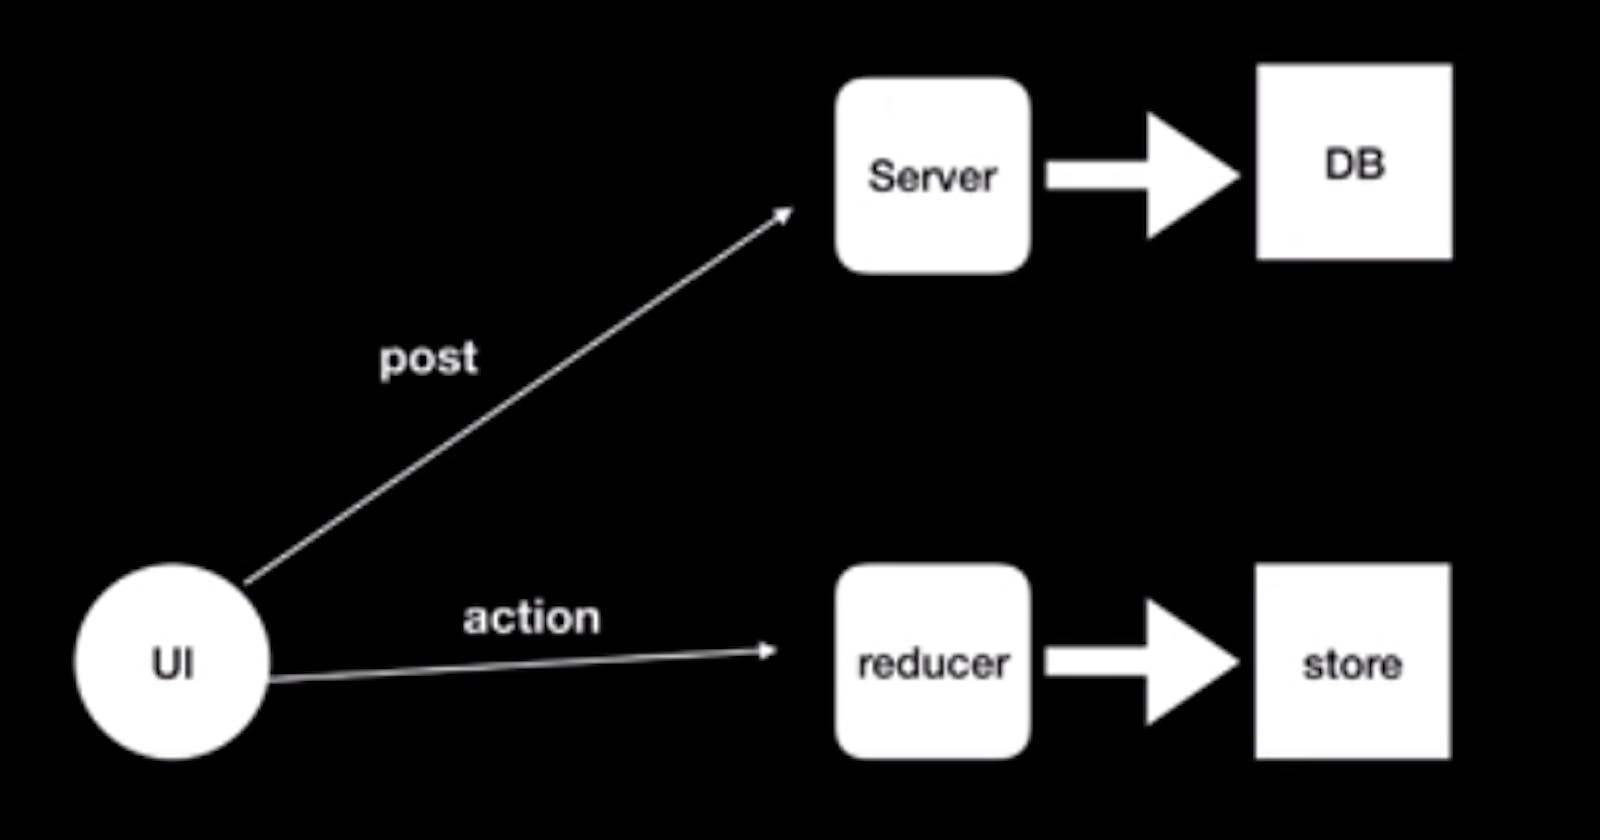 Analogy: React Redux in Web Application Architecture